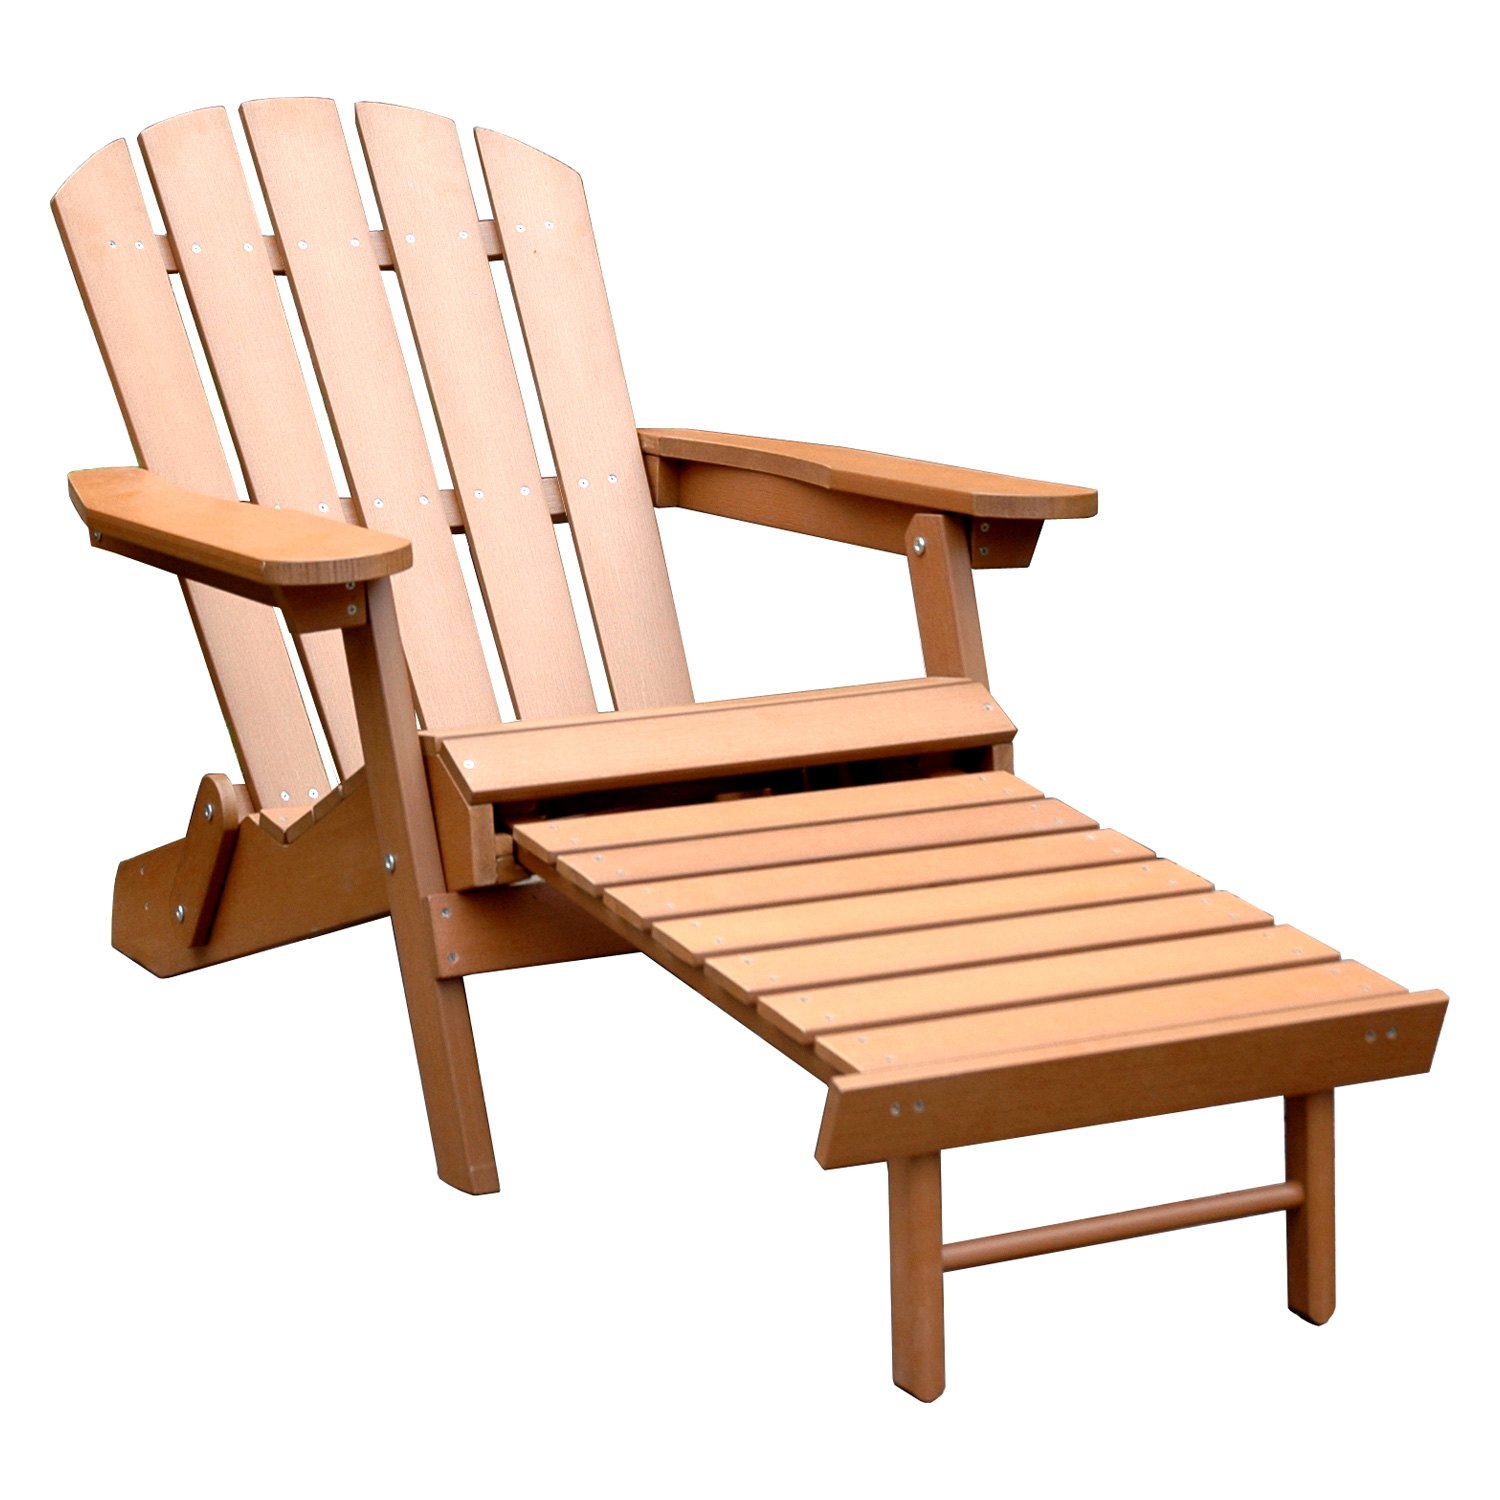 Merry® ADC0111100910 - Faux Wood Adirondack Chair